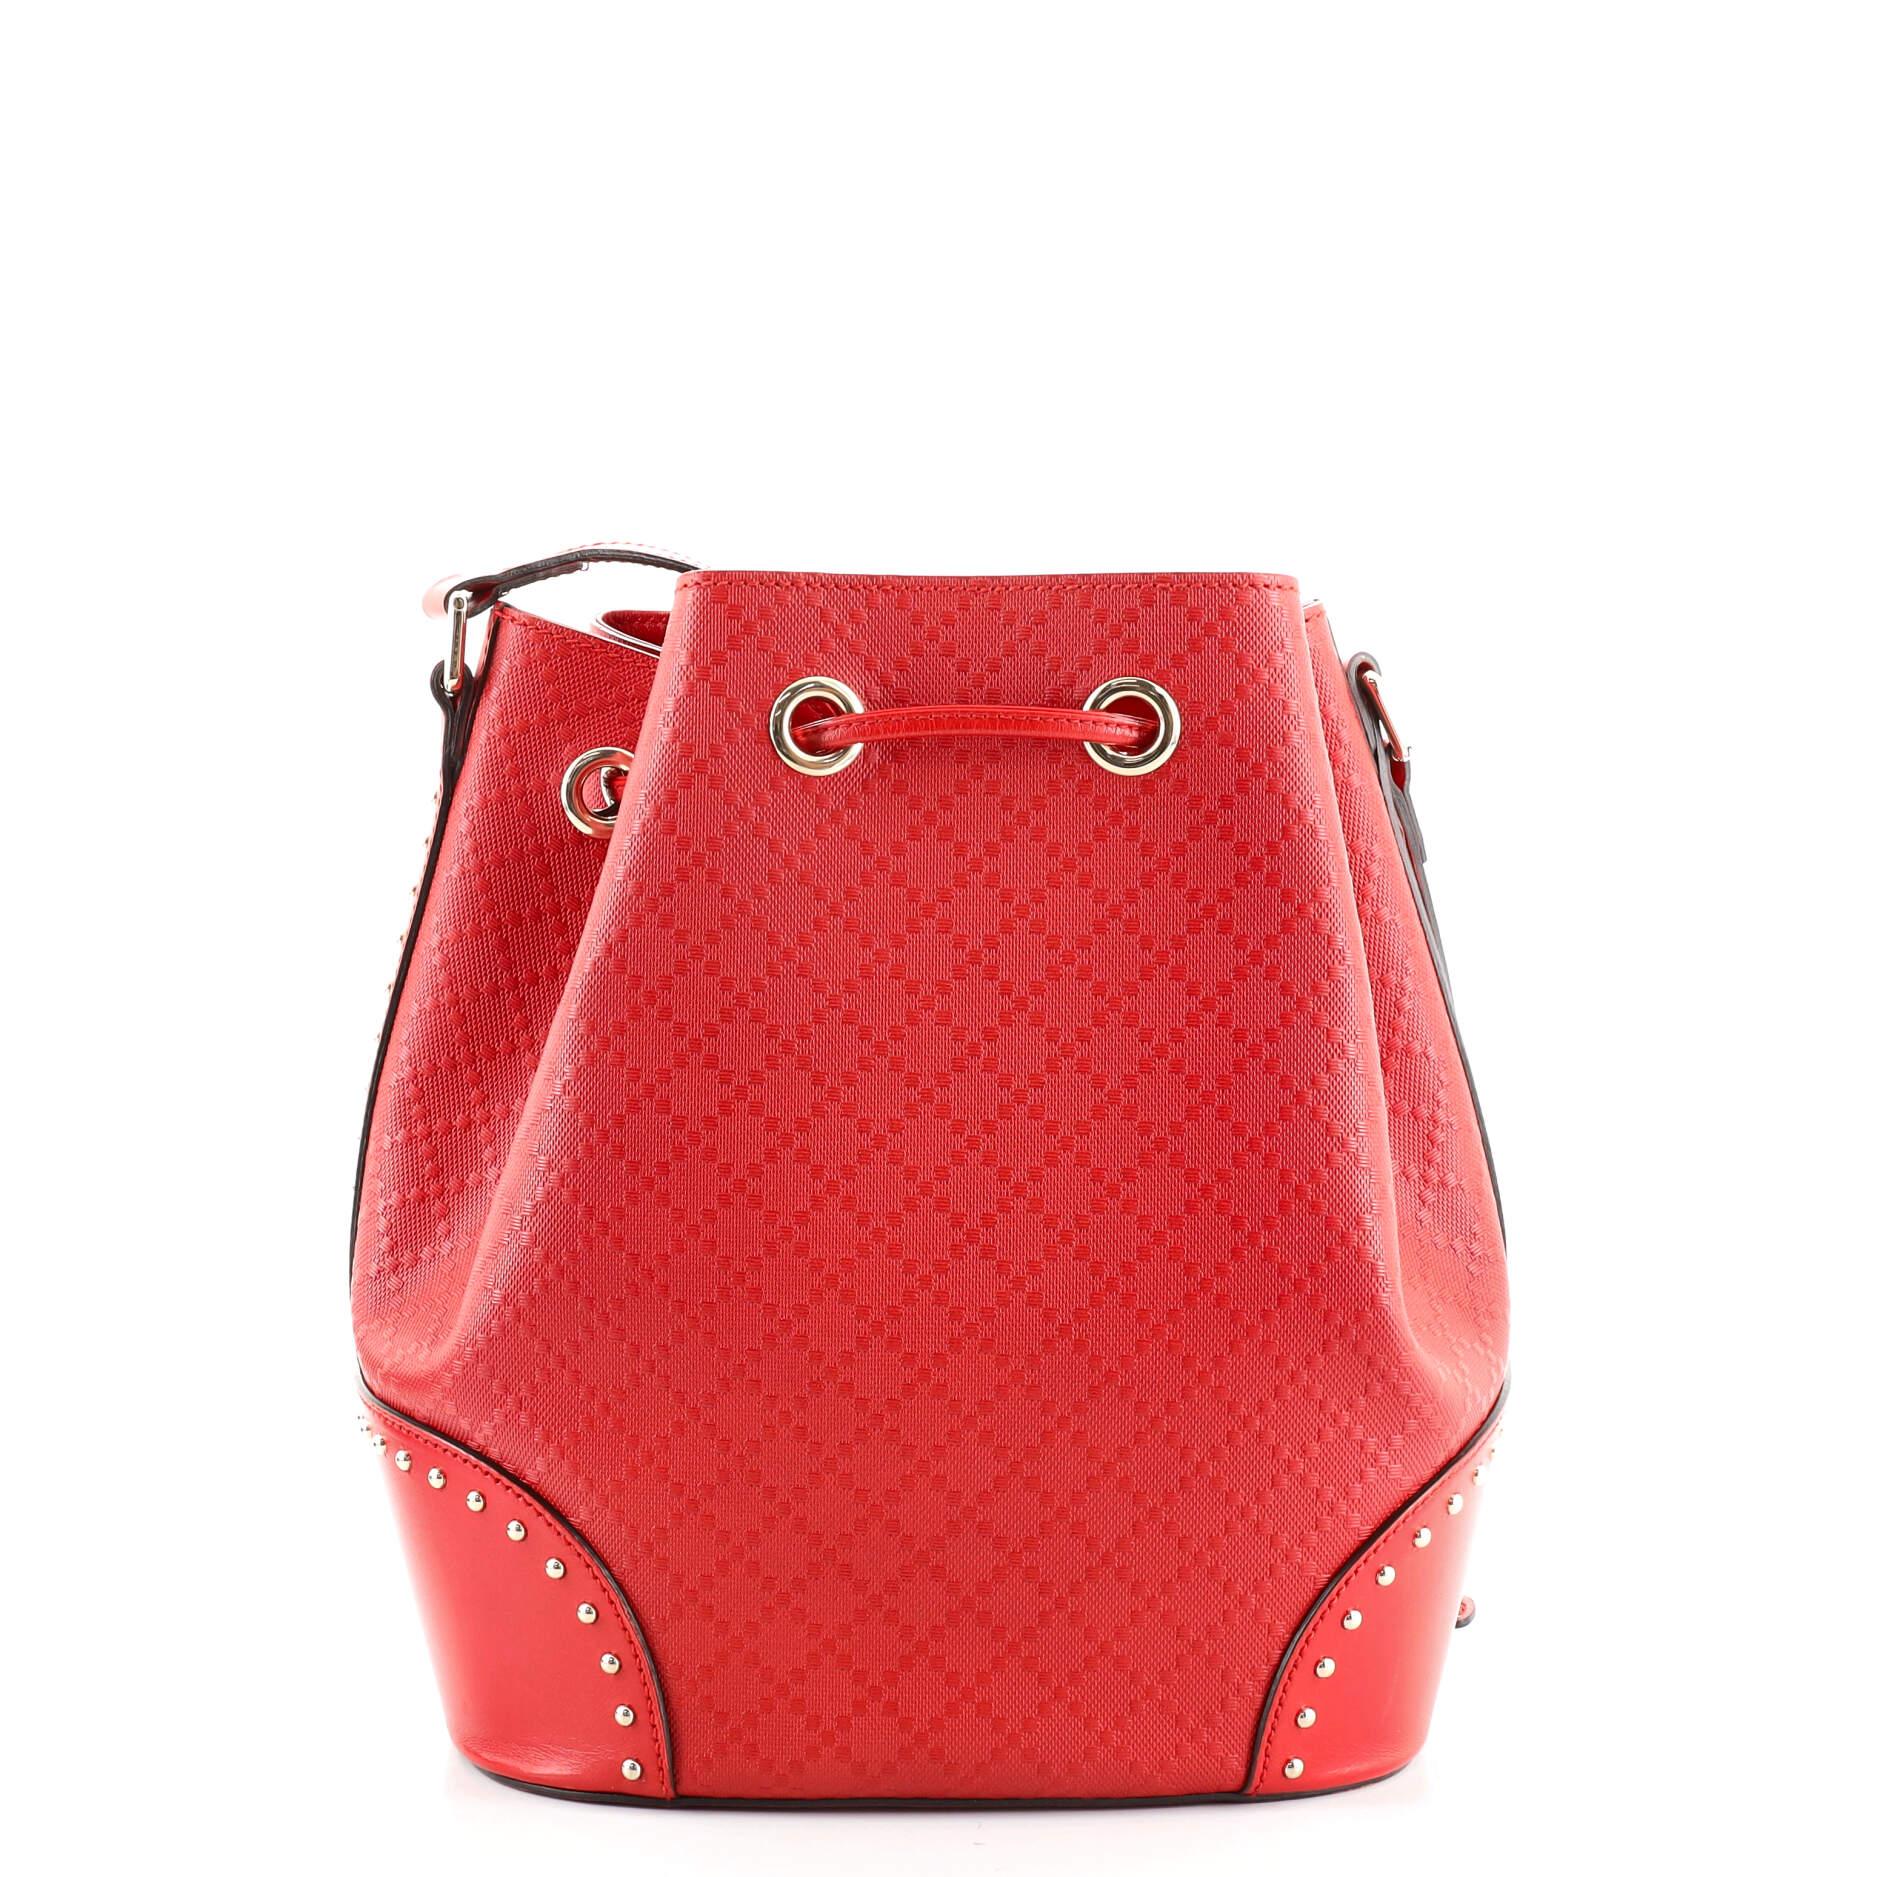 Red Gucci Bright Bucket Bag Studded Diamante Leather Large